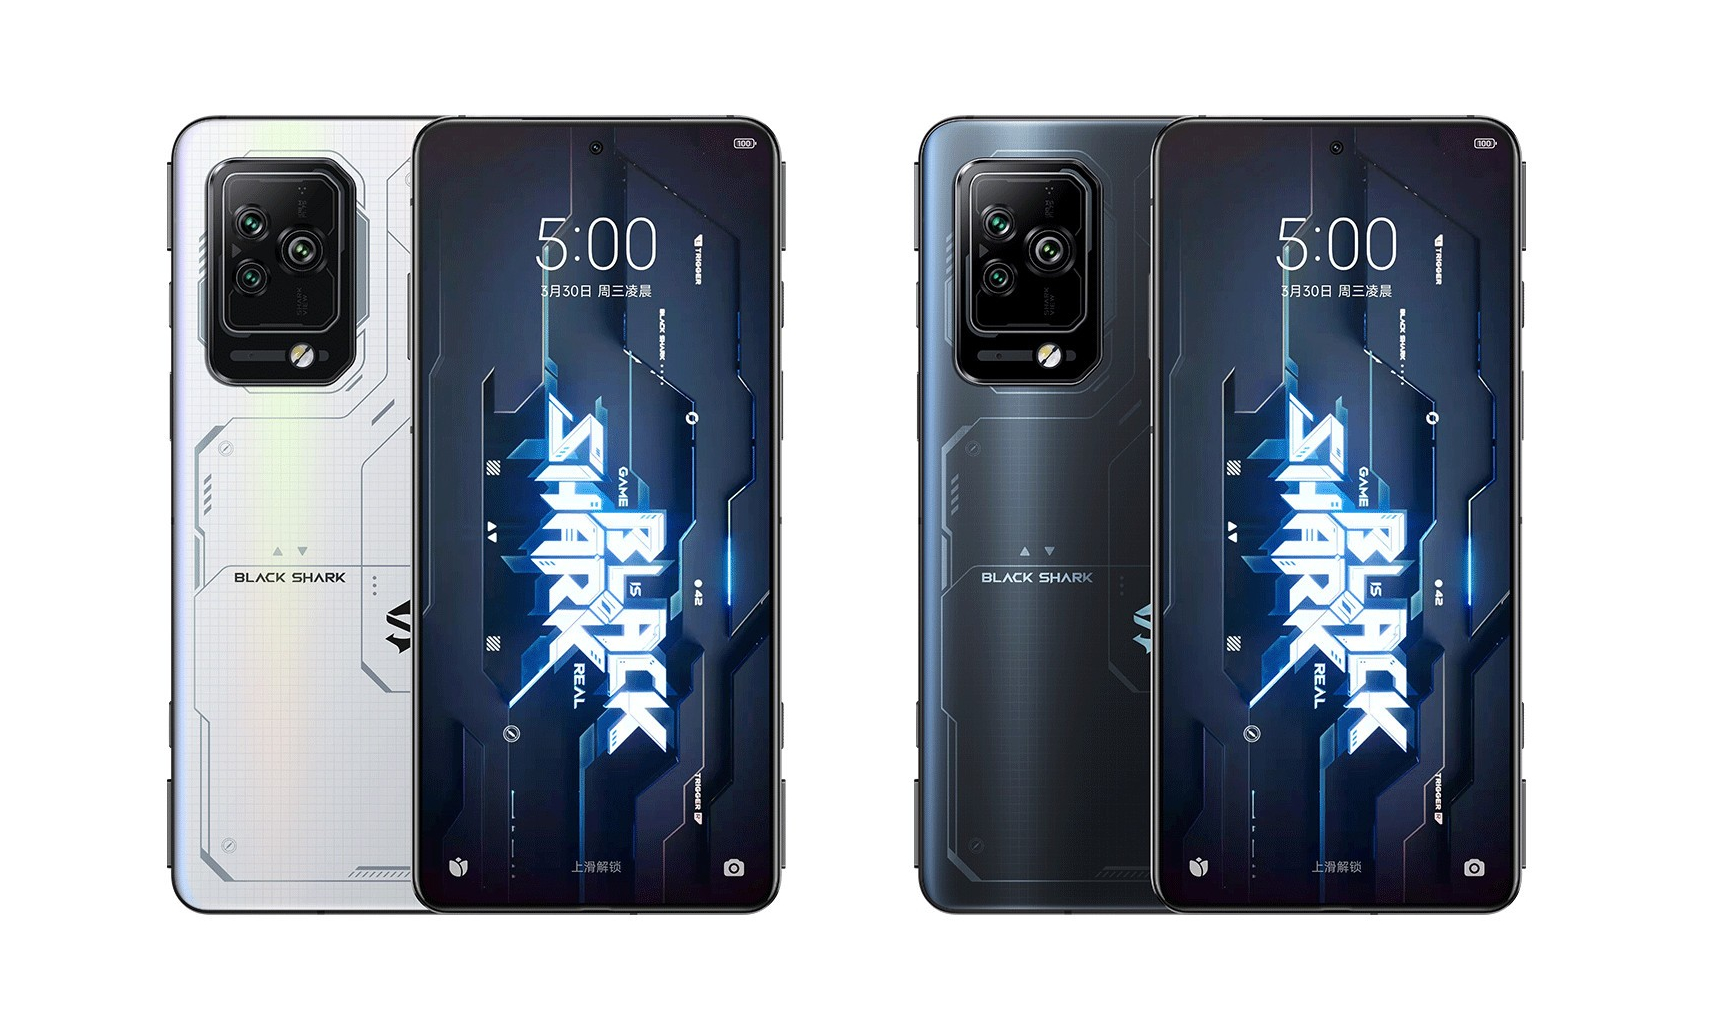 Xiaomi Black Shark 5 Pro presented with a Snapdragon 8 Gen 1 and a 108 MP triple camera - NotebookCheck.net News